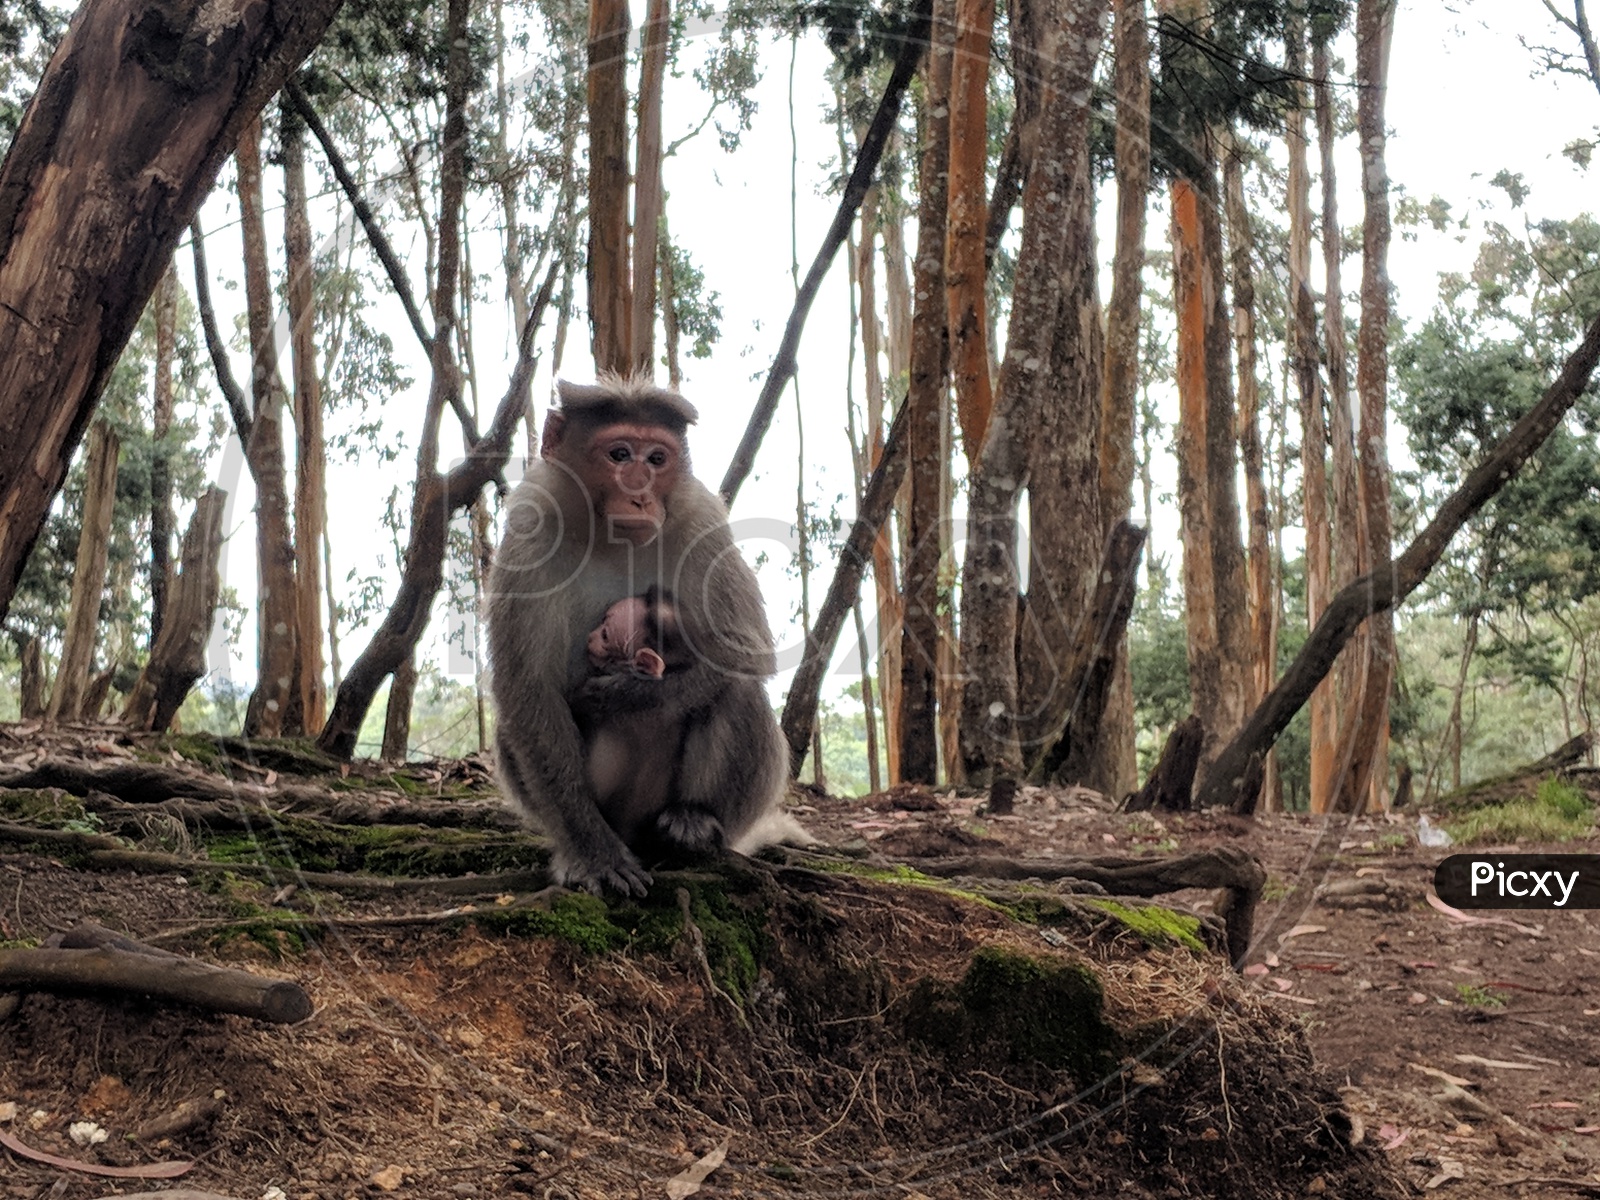 Monkey in the Woods